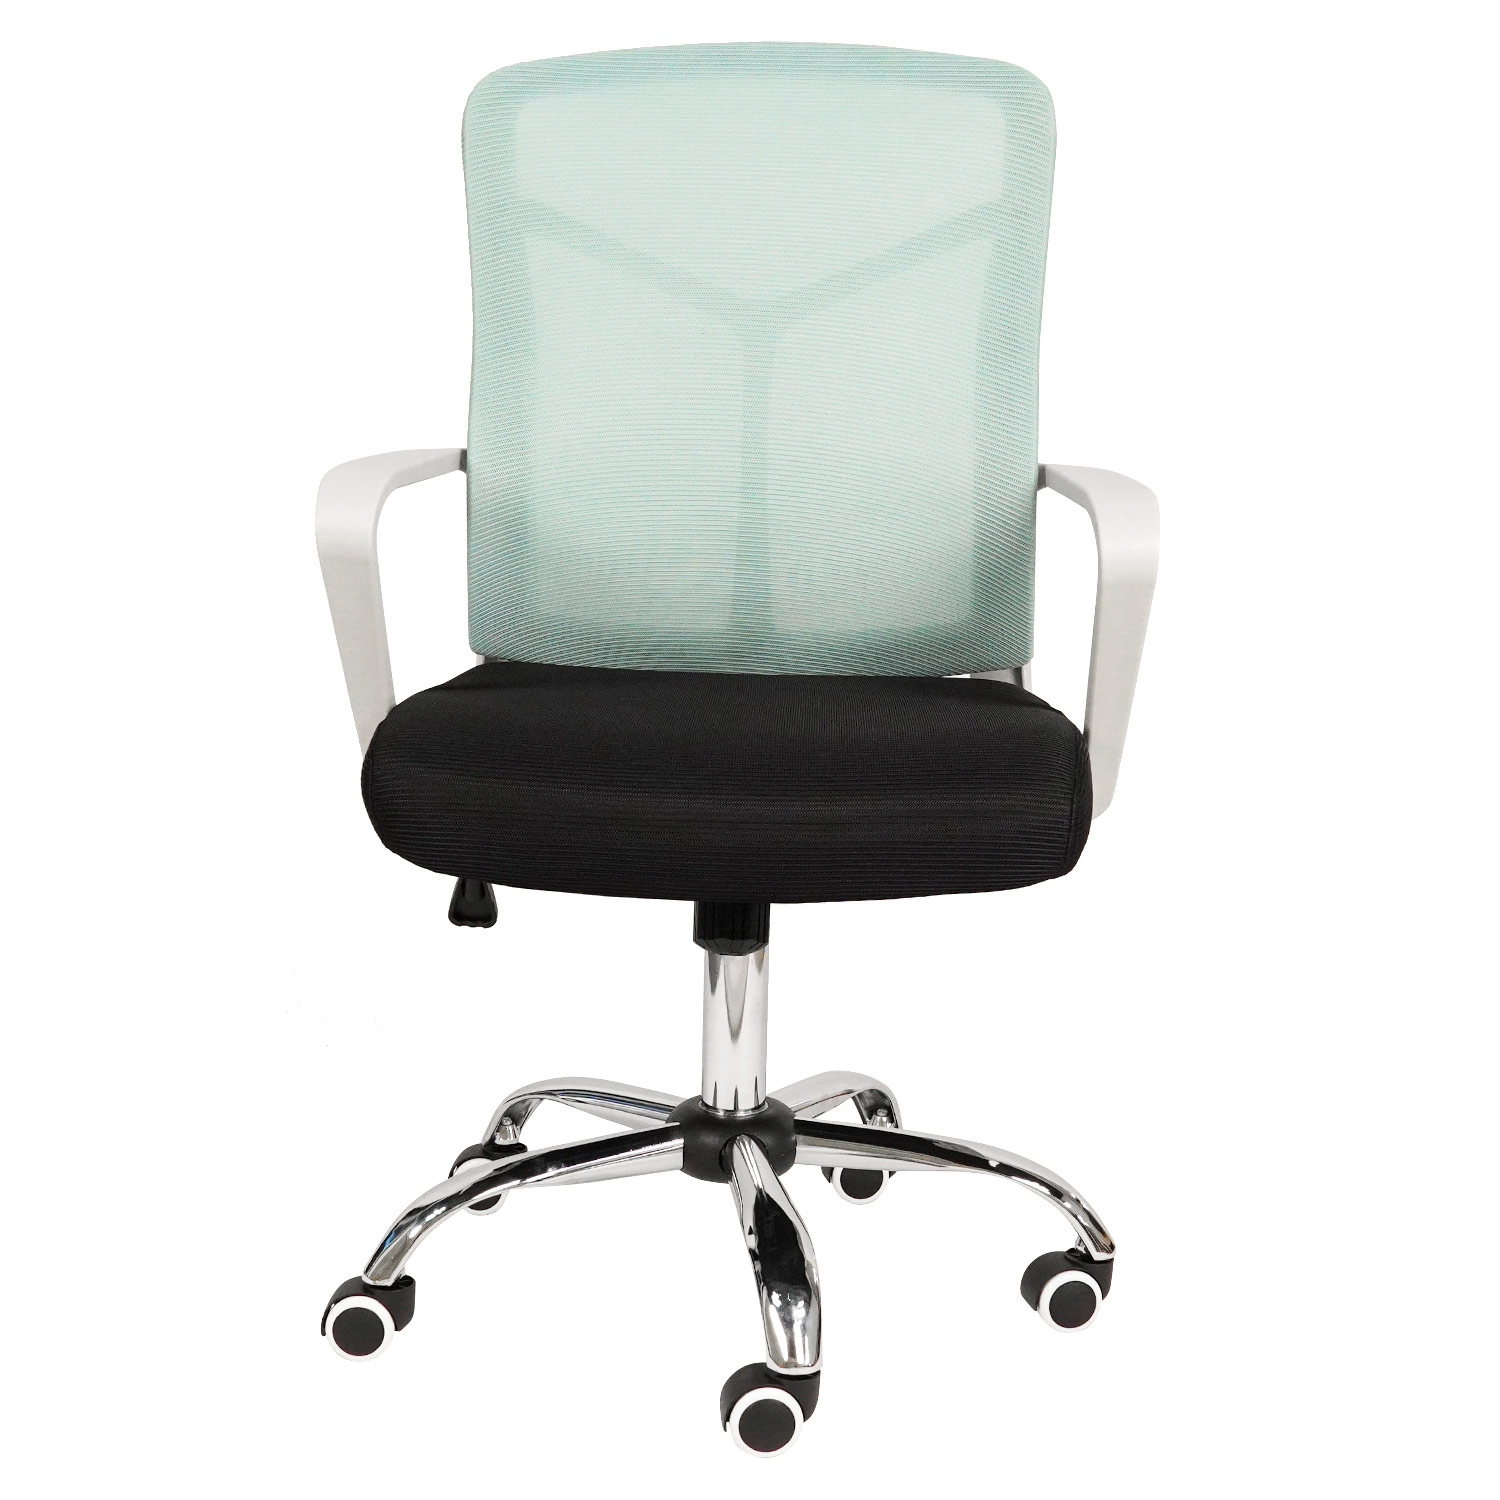 Mid Back Mesh Office Chair Ergonomic Swivel Desk Office Chair Adjustable Height Computer Task Chairs